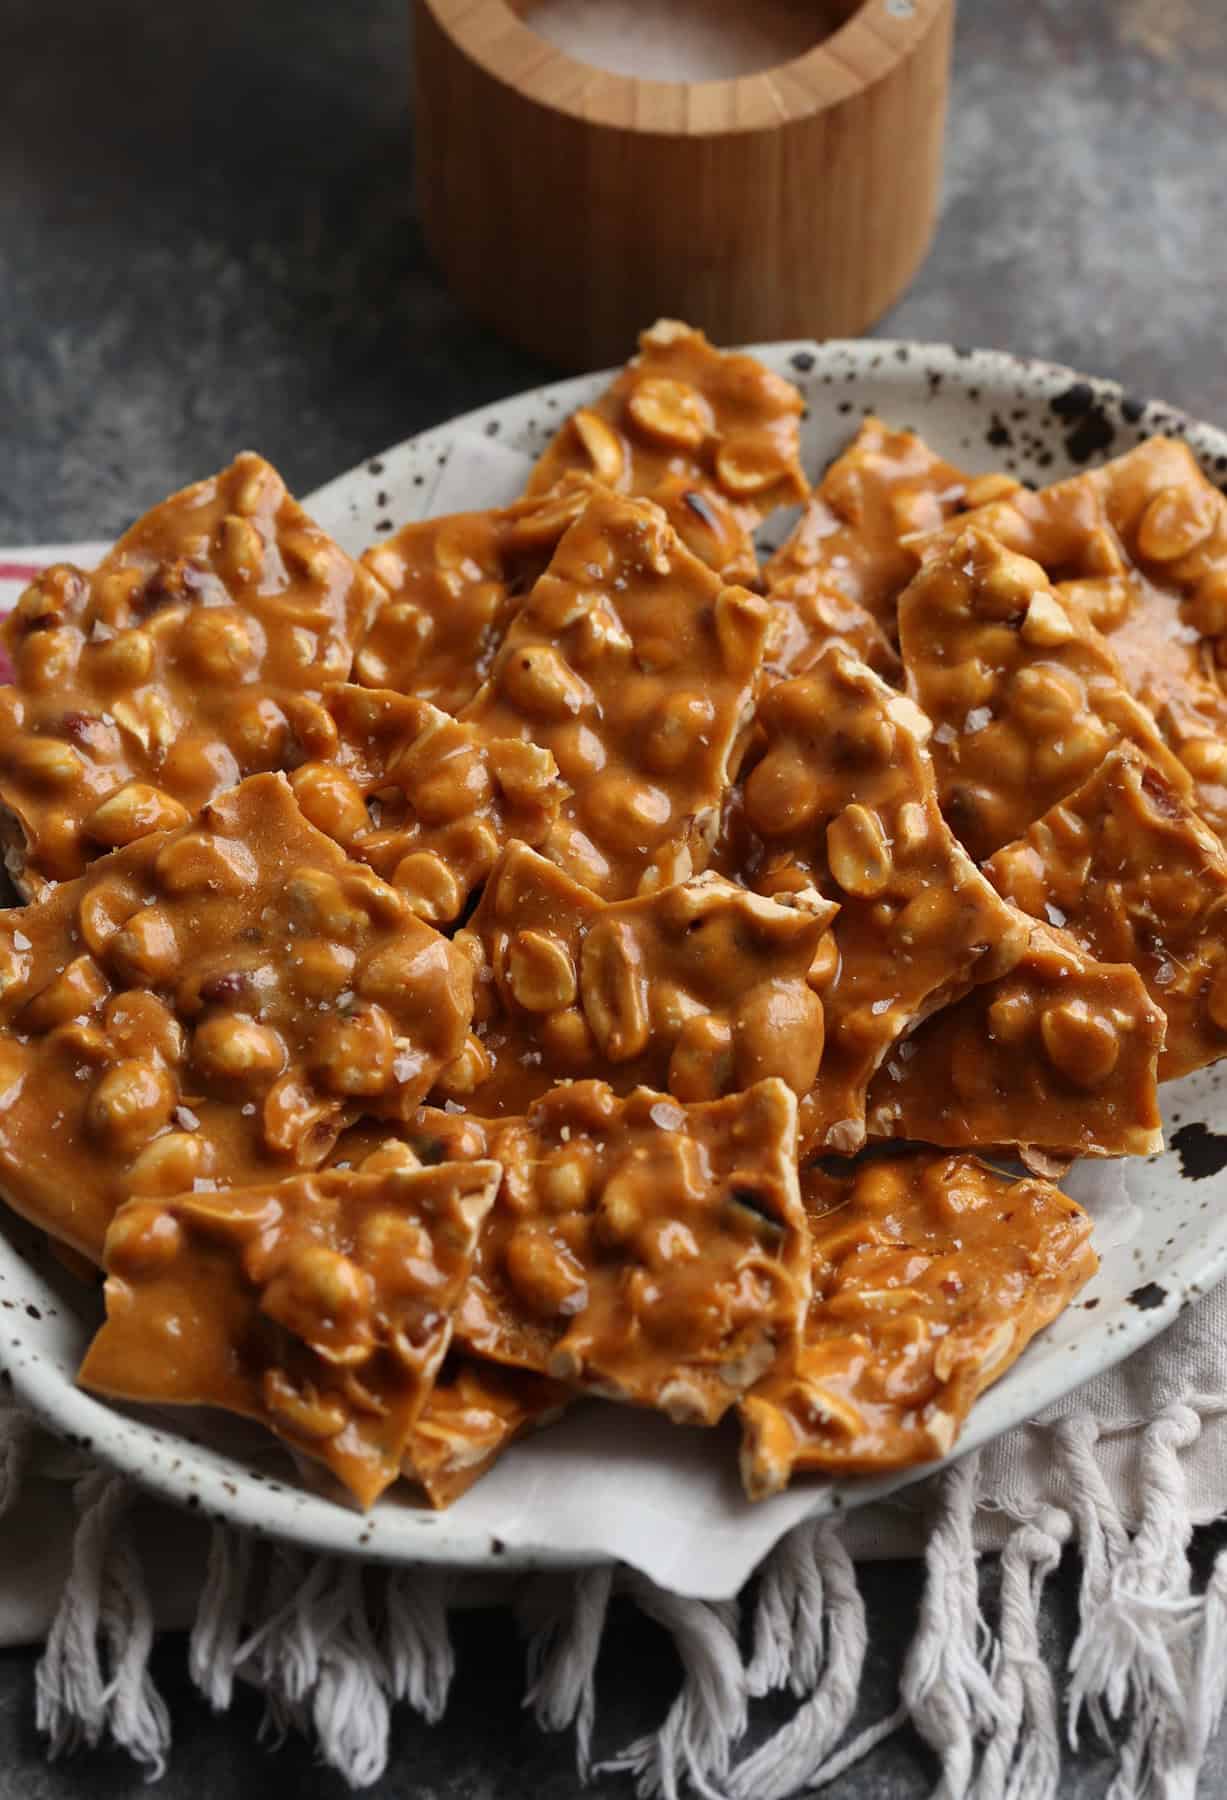 Homemade peanut brittle served on a plate.